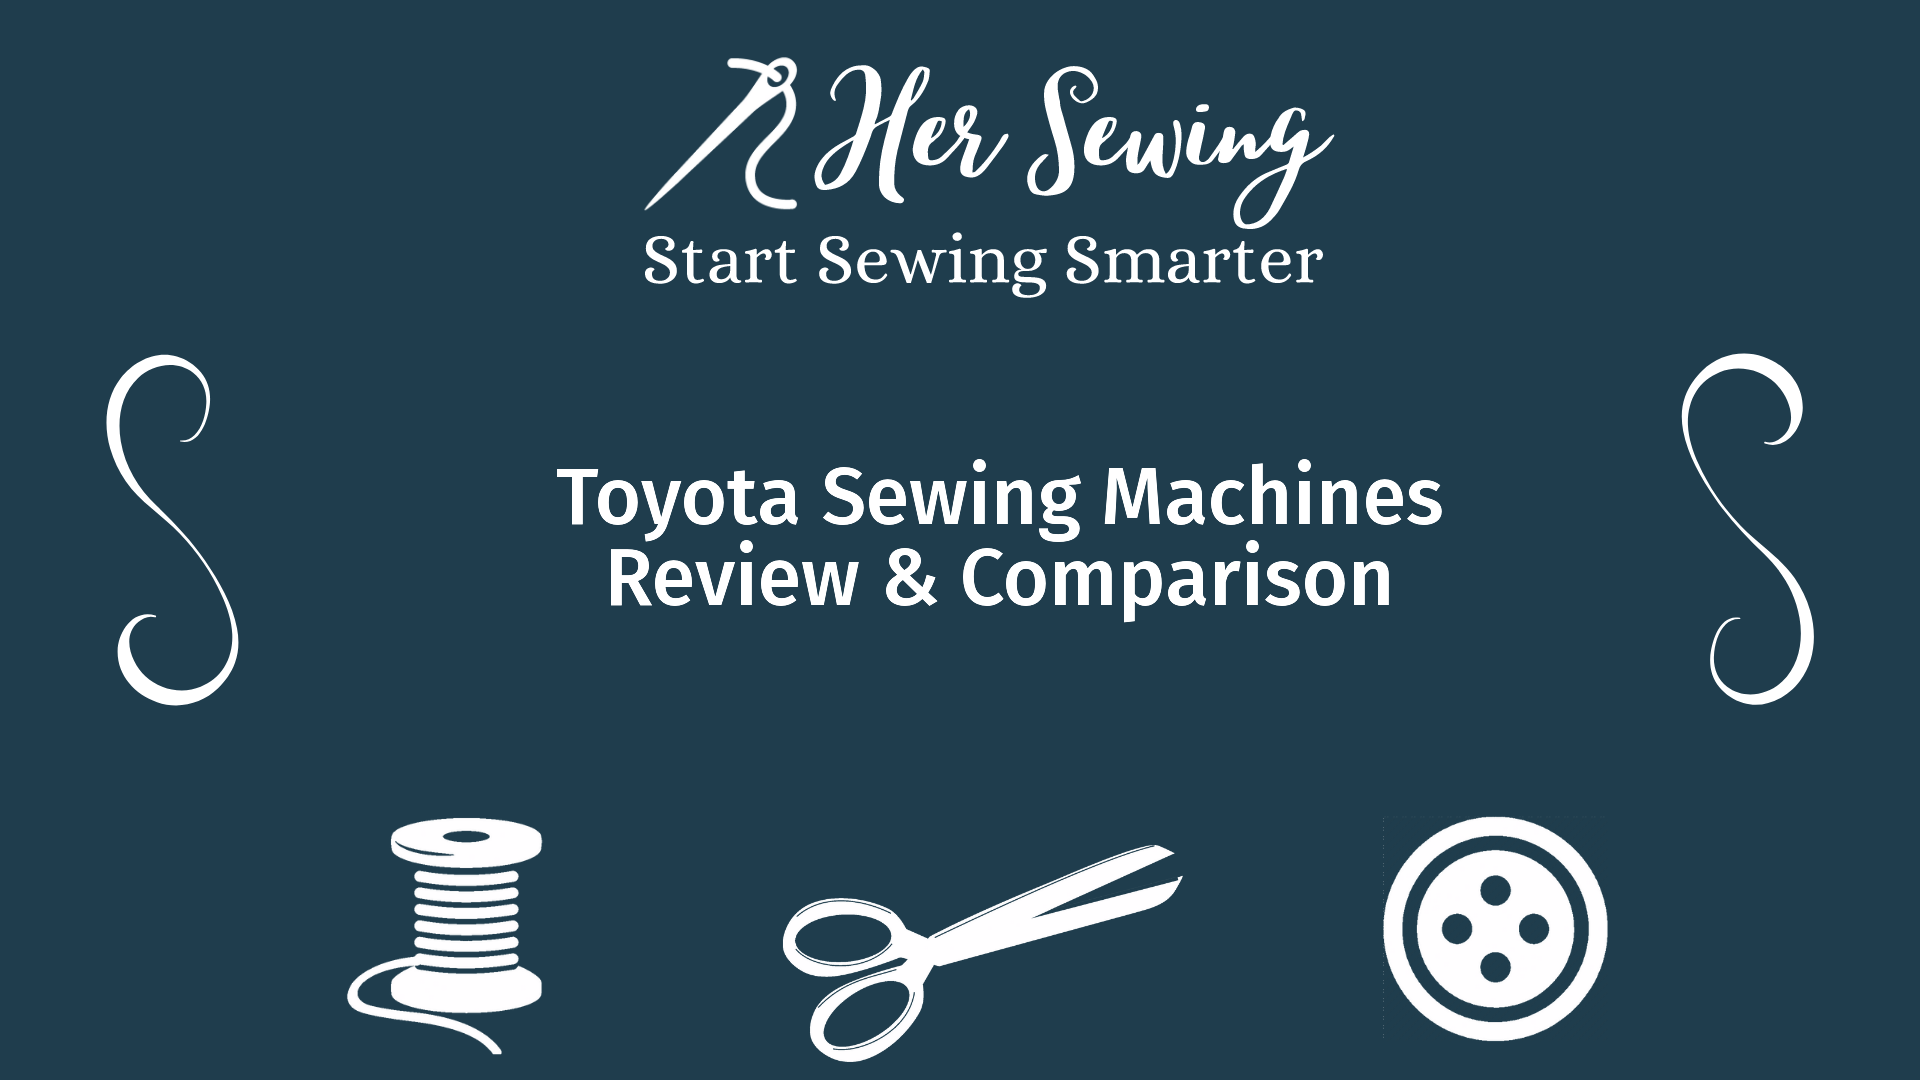 Toyota Sewing Machines Review & Comparison